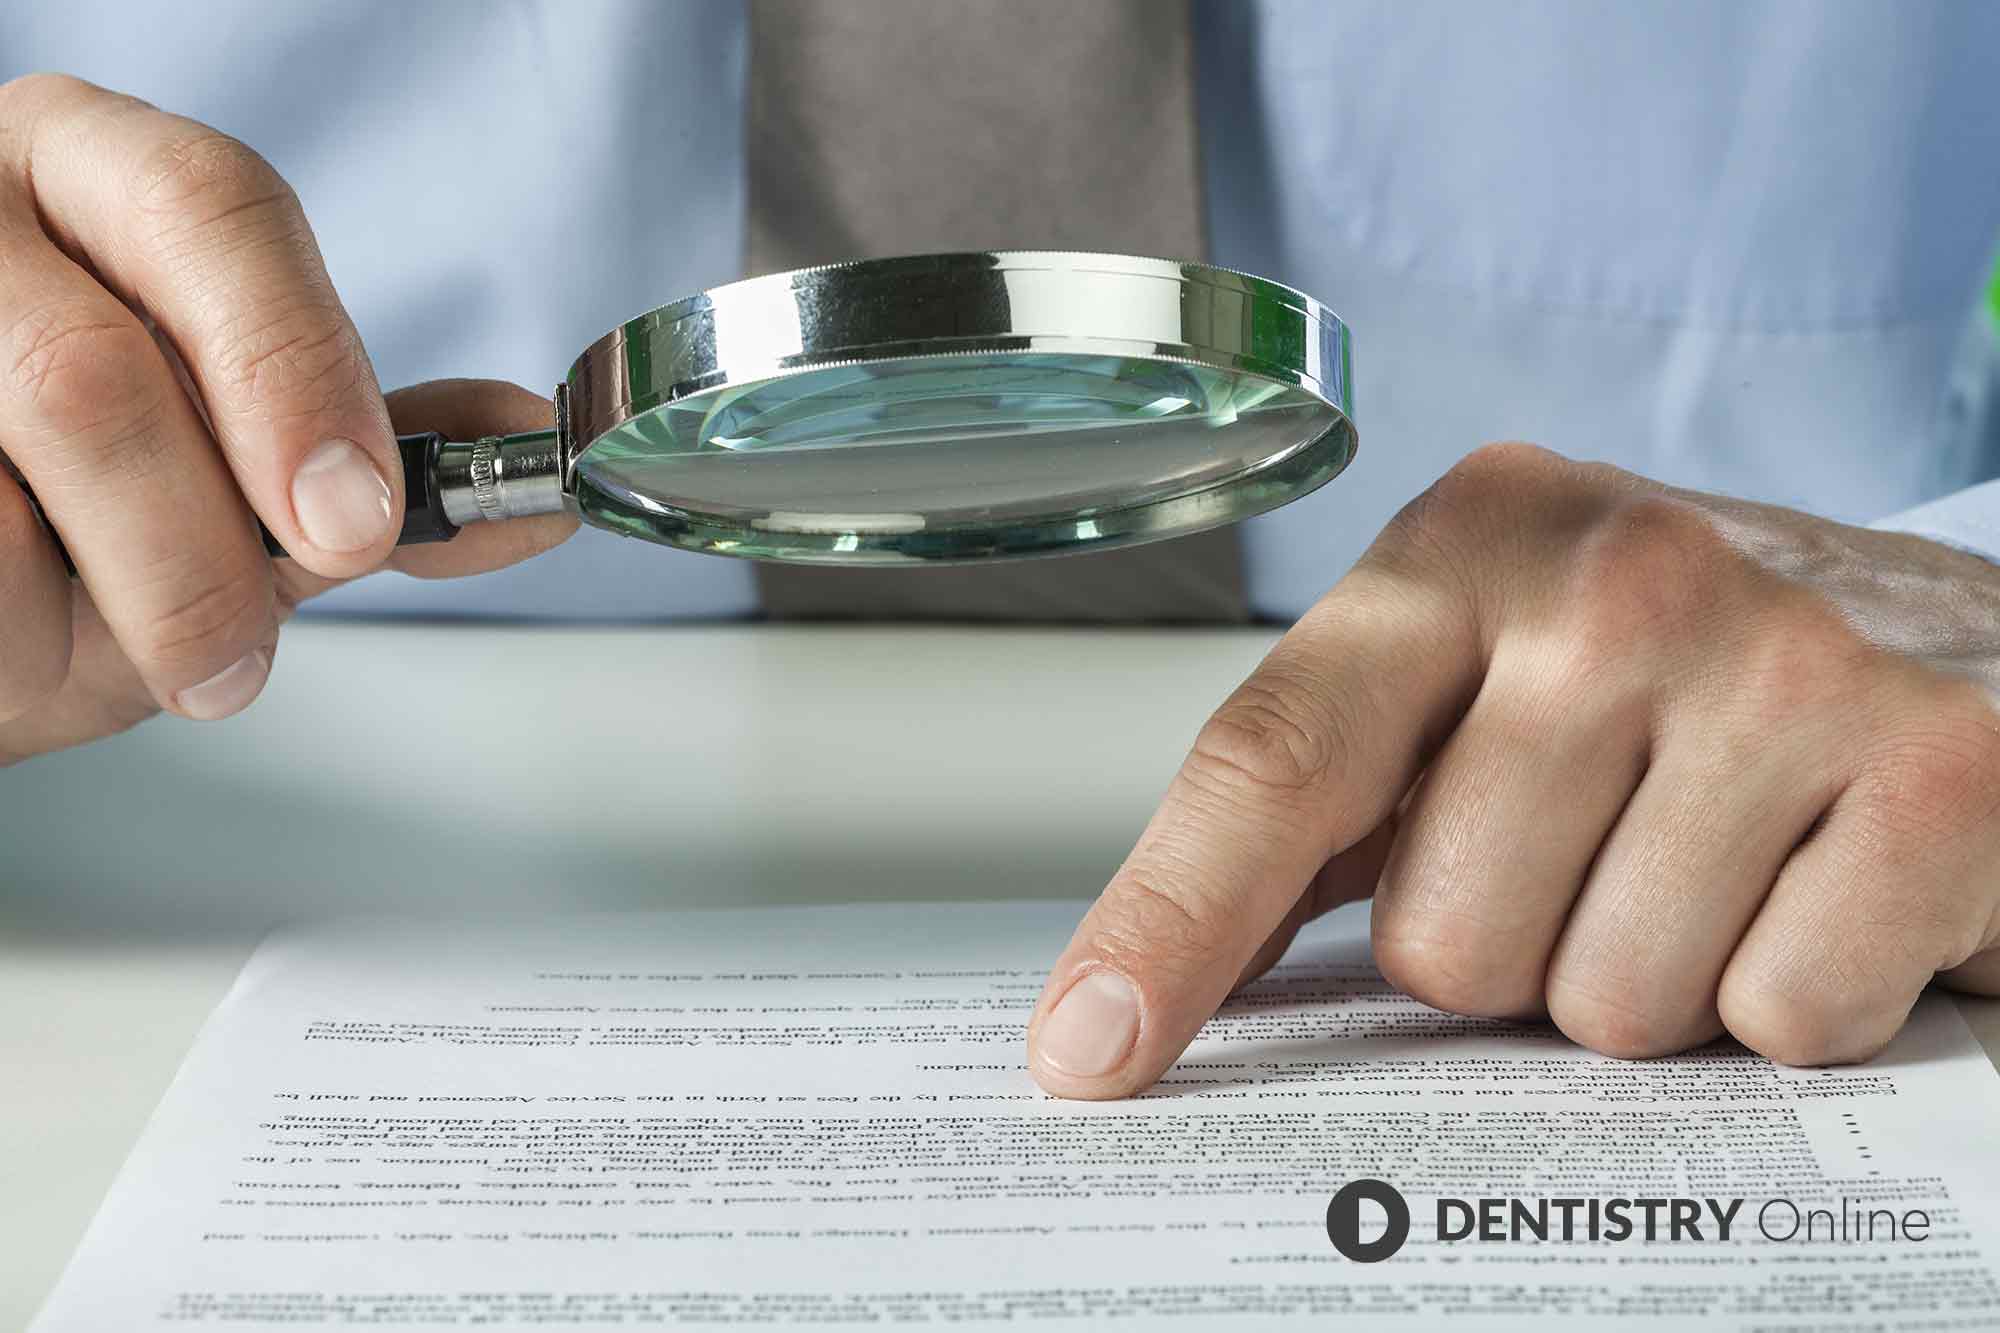 An increasing number of dentists say they fear a regulatory investigation